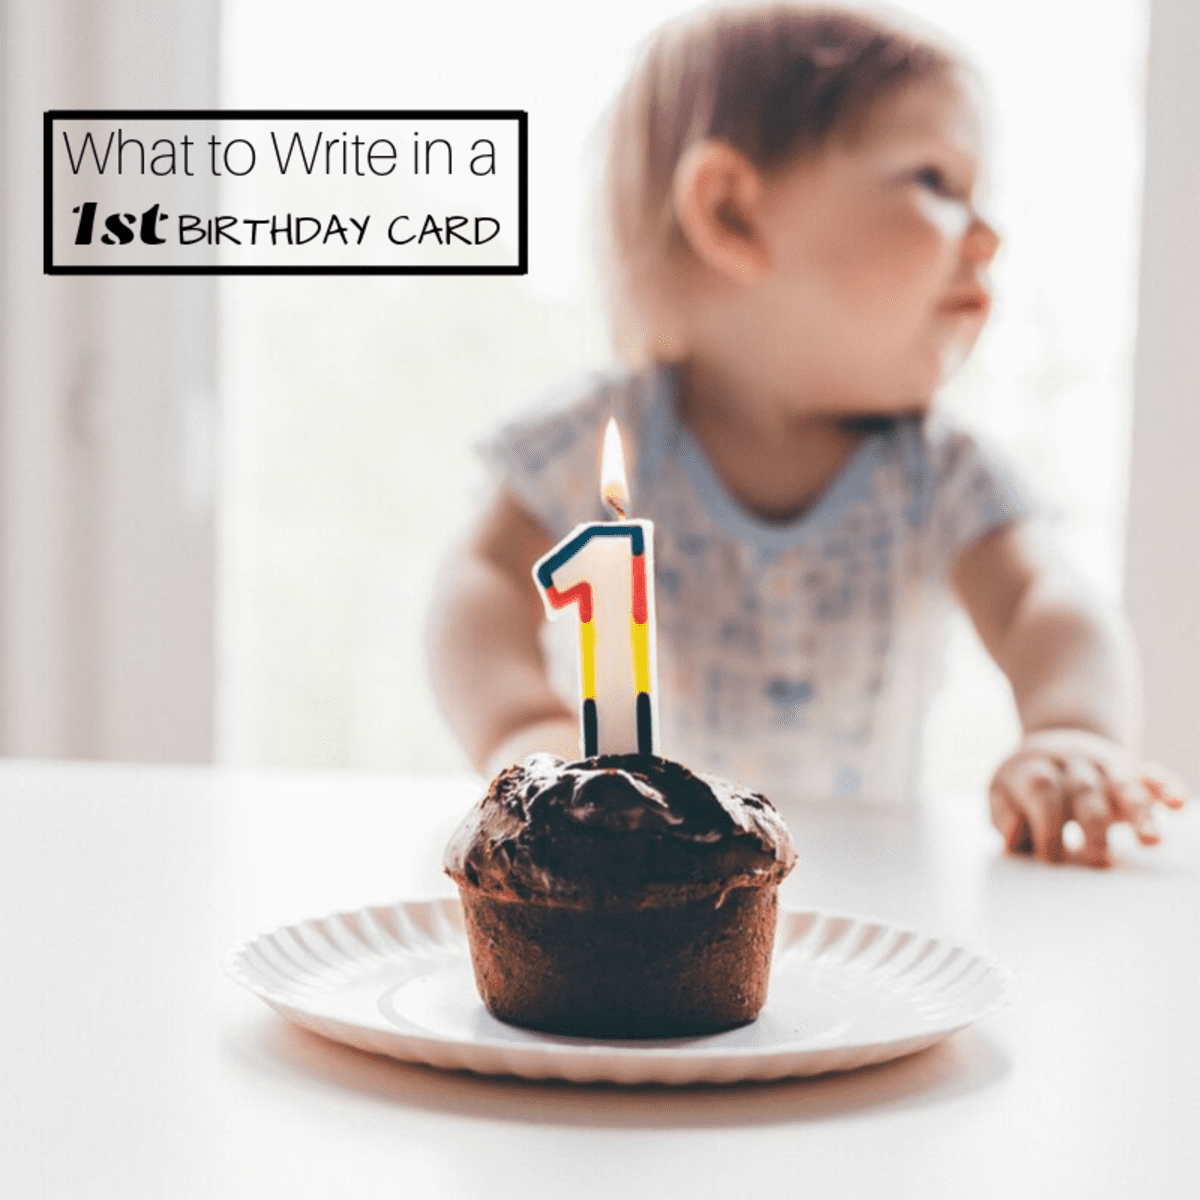 15 Cake Puns You Didn't Know You Kneaded | Birthday card puns, Cake quotes  funny, Birthday puns